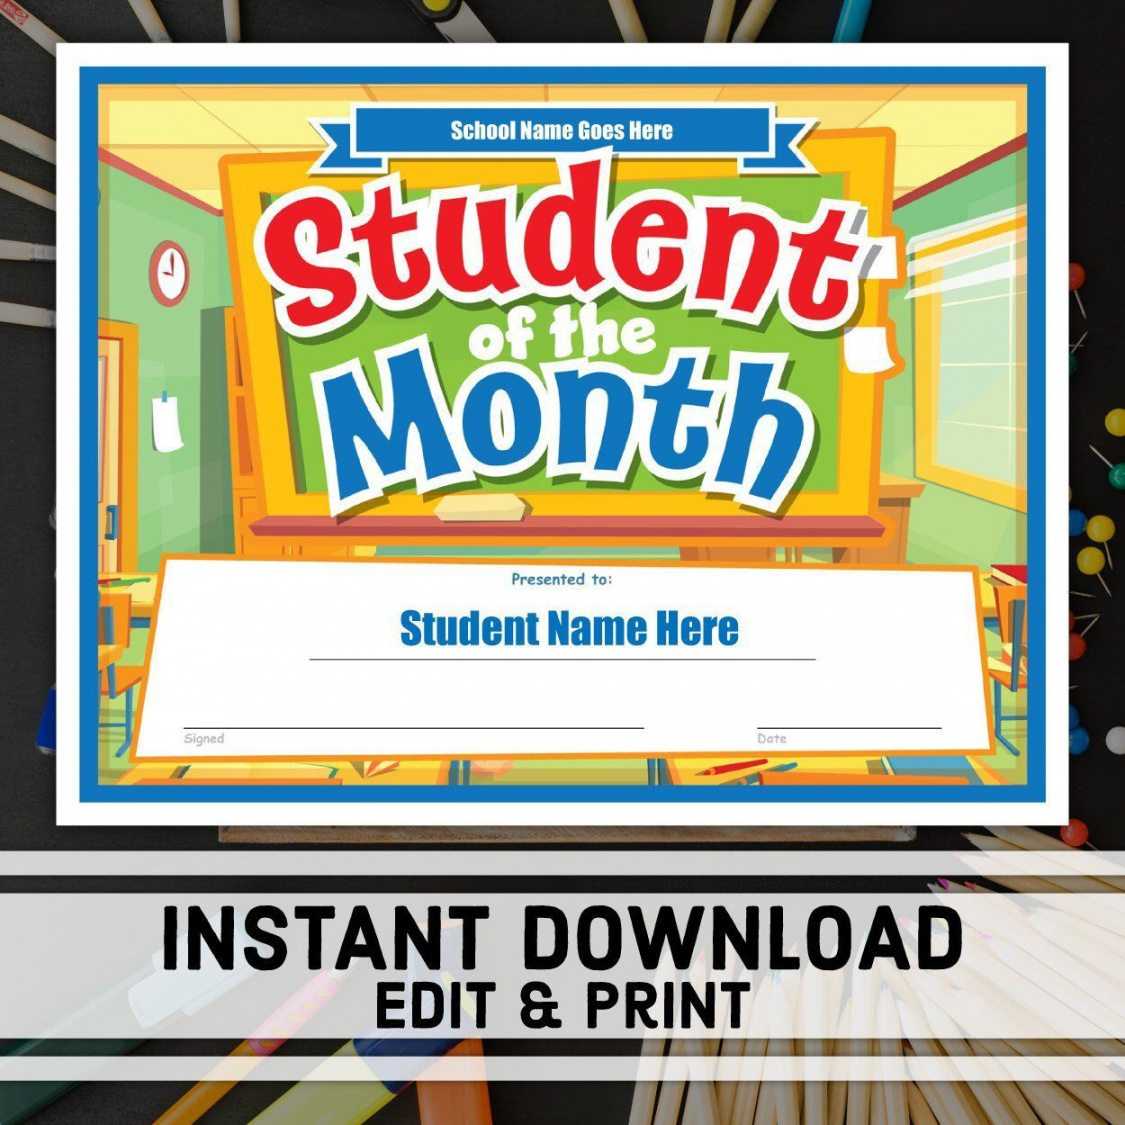 free-printable-student-of-the-month-certificate-templates